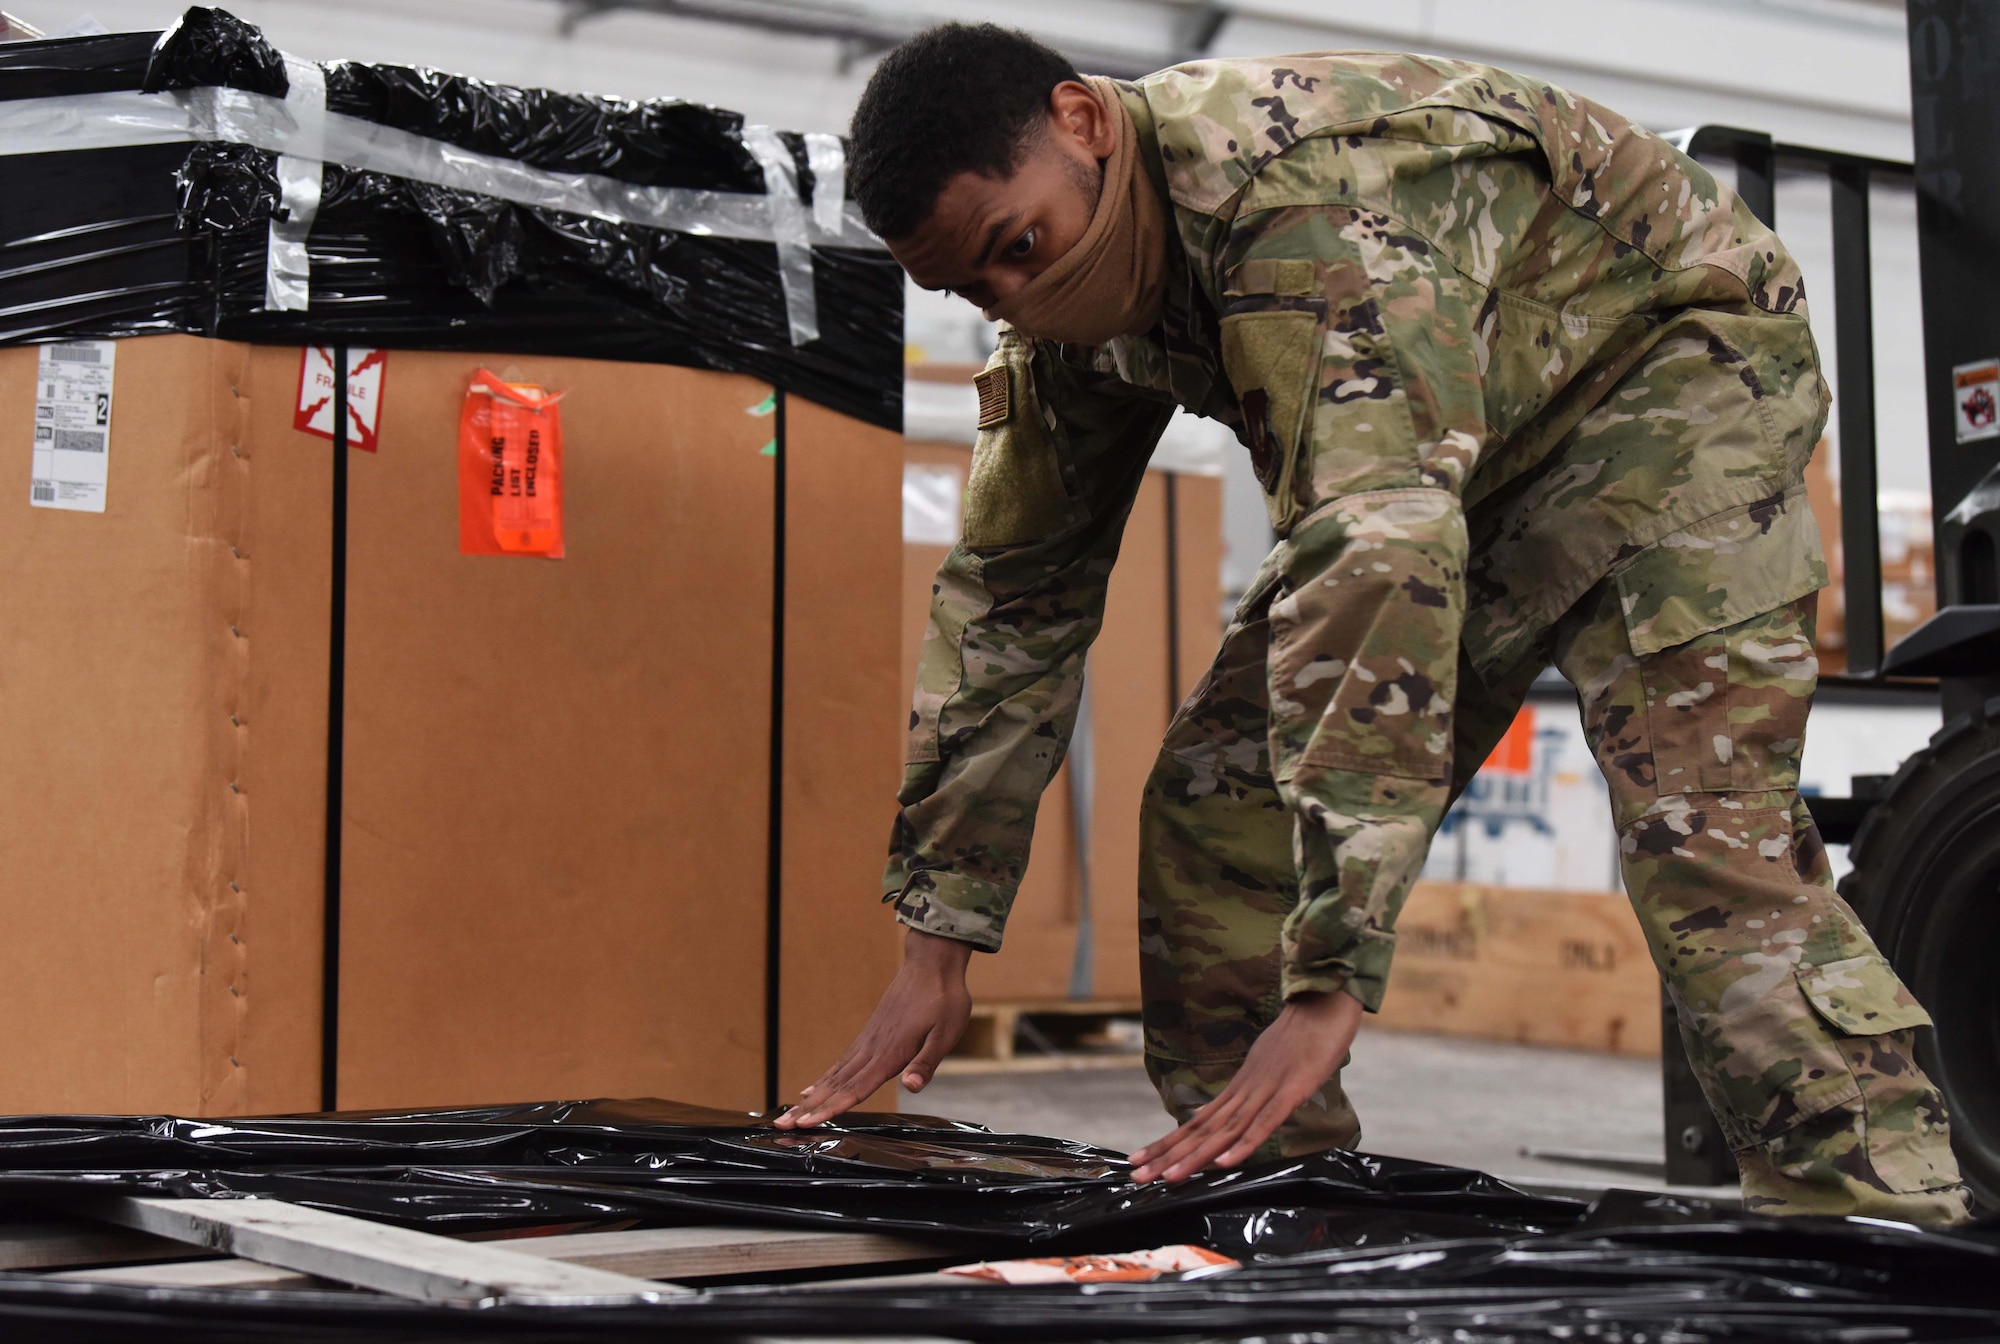 Airman 1st Class Malyk Wright, 100th Logistics Readiness Squadron packing specialist, prepares cargo for movement at RAF Mildenhall, England, June 8, 2020. The deployment and distribution within the traffic management office packages cargo, certifies inbound and outbound cargo and schedules deliveries. (U.S. Air Force photo by Senior Airman Brandon Esau)